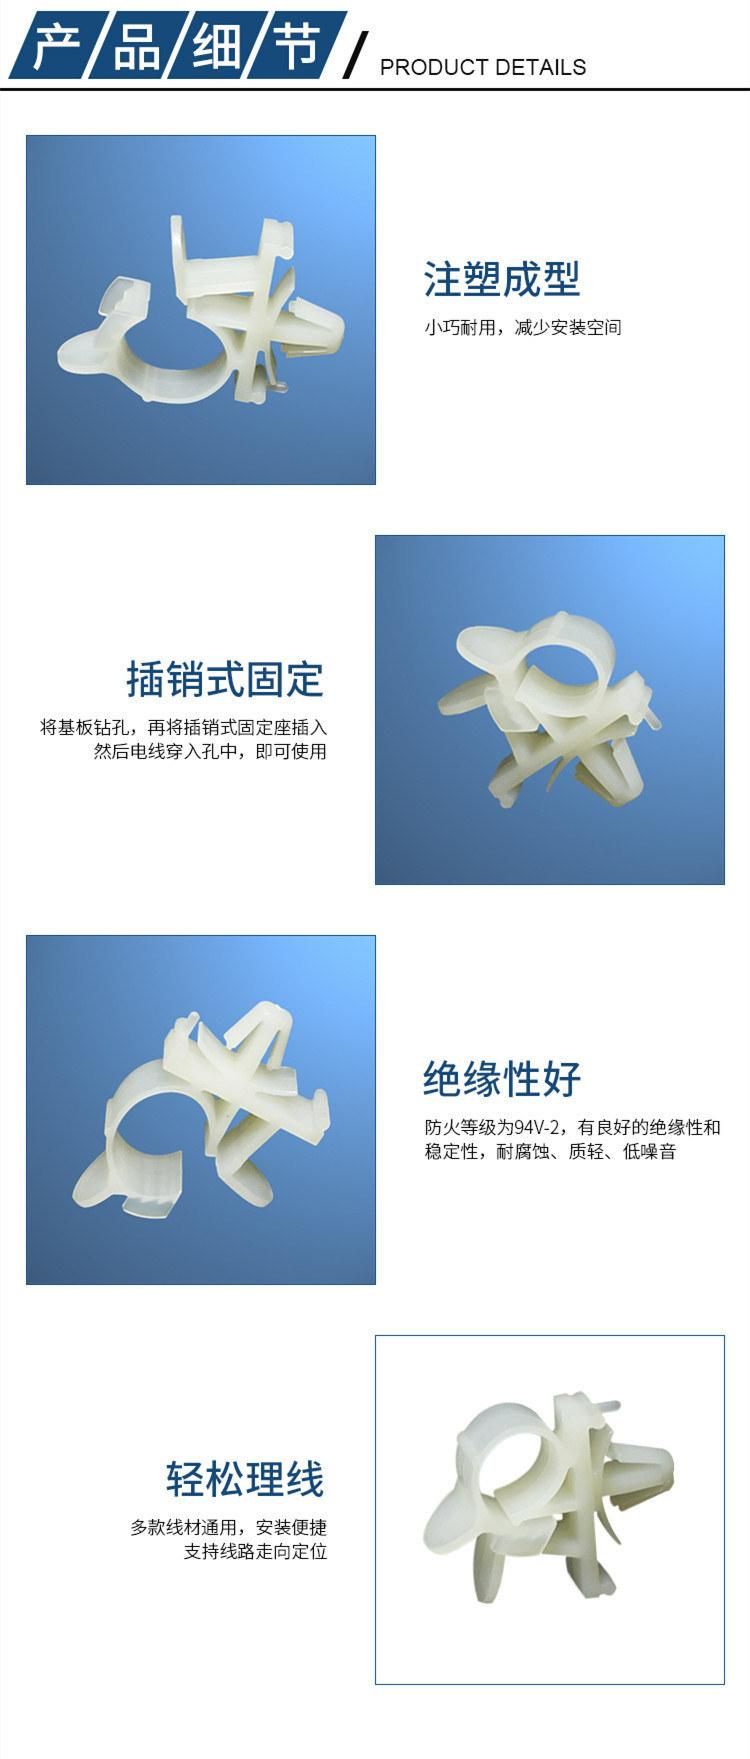 Plastic Cable Fasten Saddle for Computer Case Cable Fastening, Heyingcn Plastic Injection Clip Buckle Nylon Cable Clip